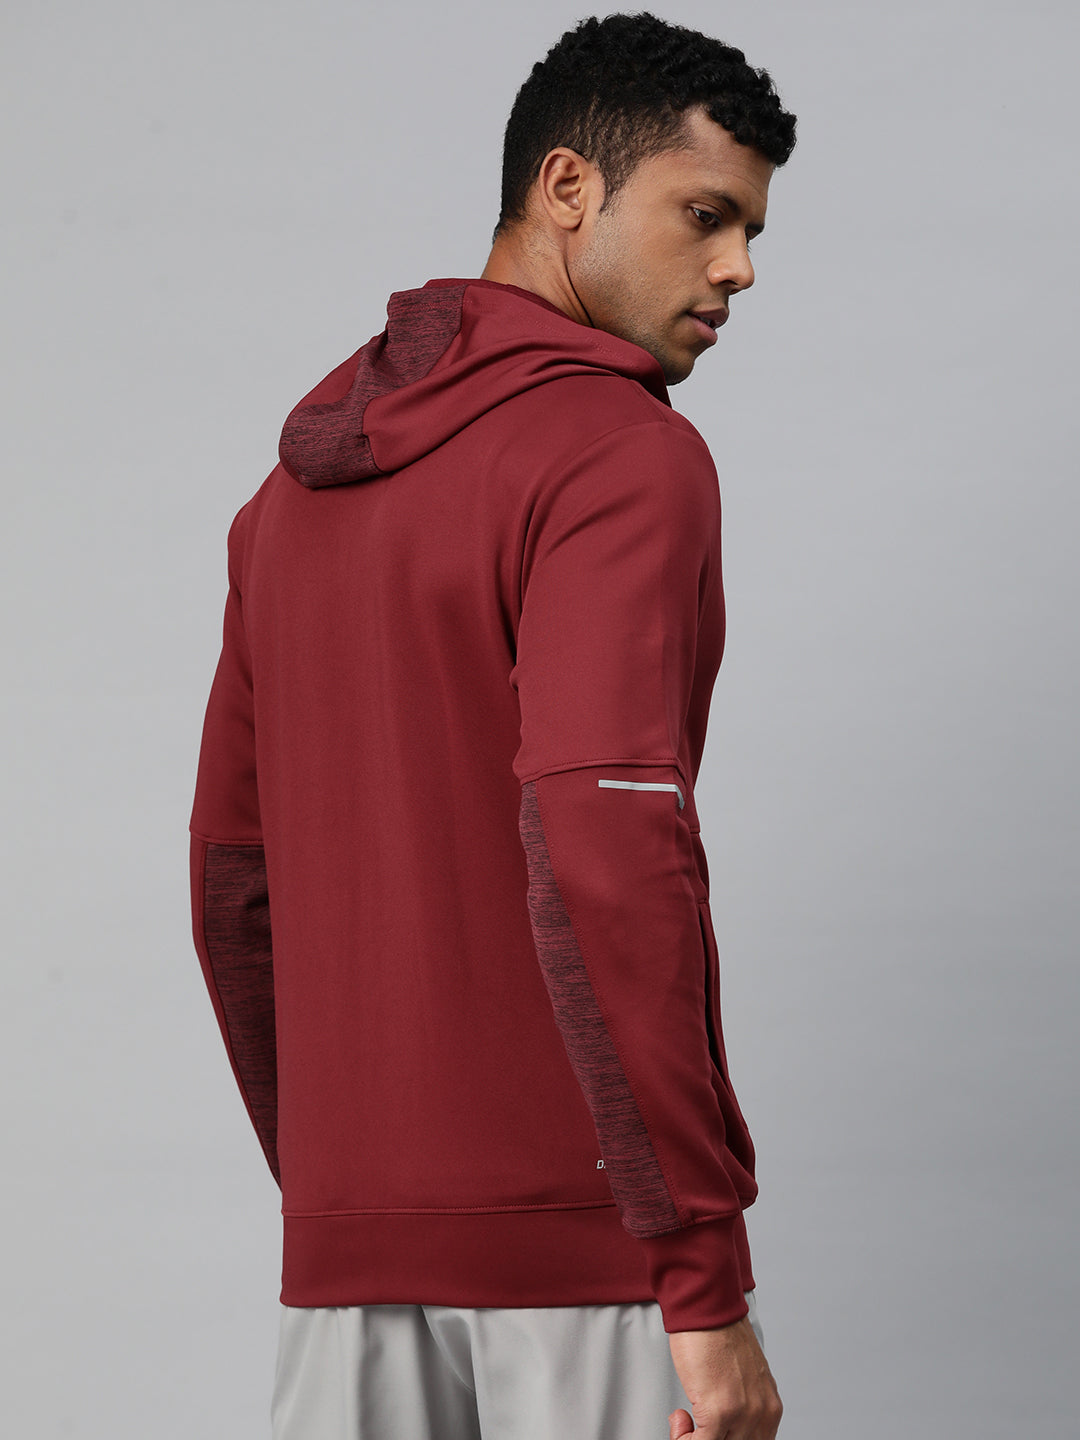 Alcis Men Training or Gym Open Front Jacket